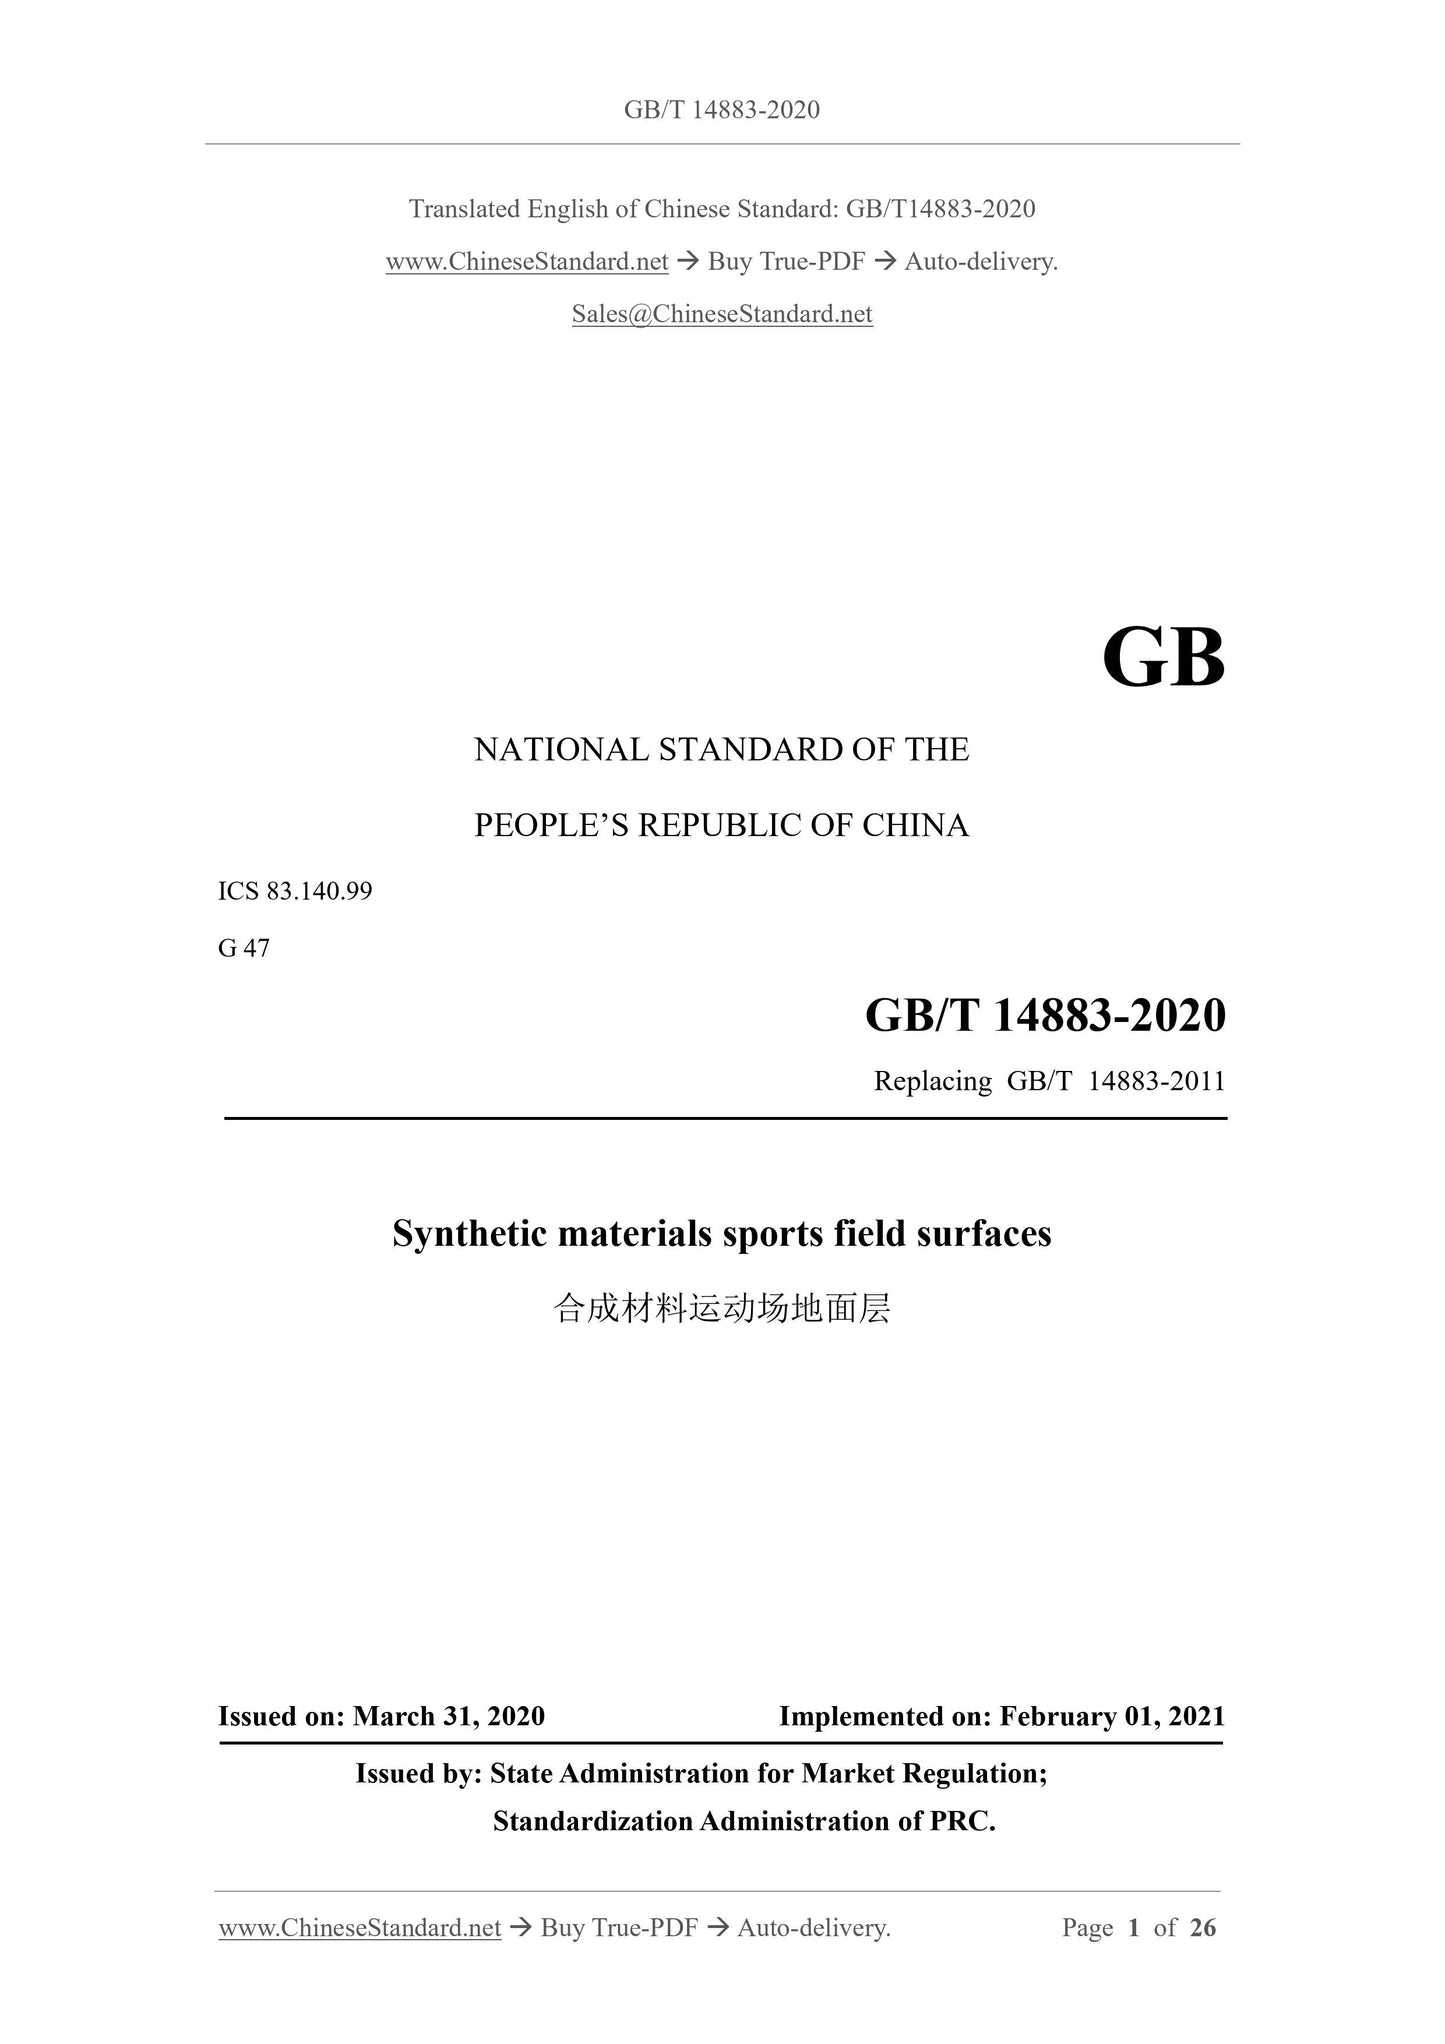 GB/T 14833-2020 Page 1